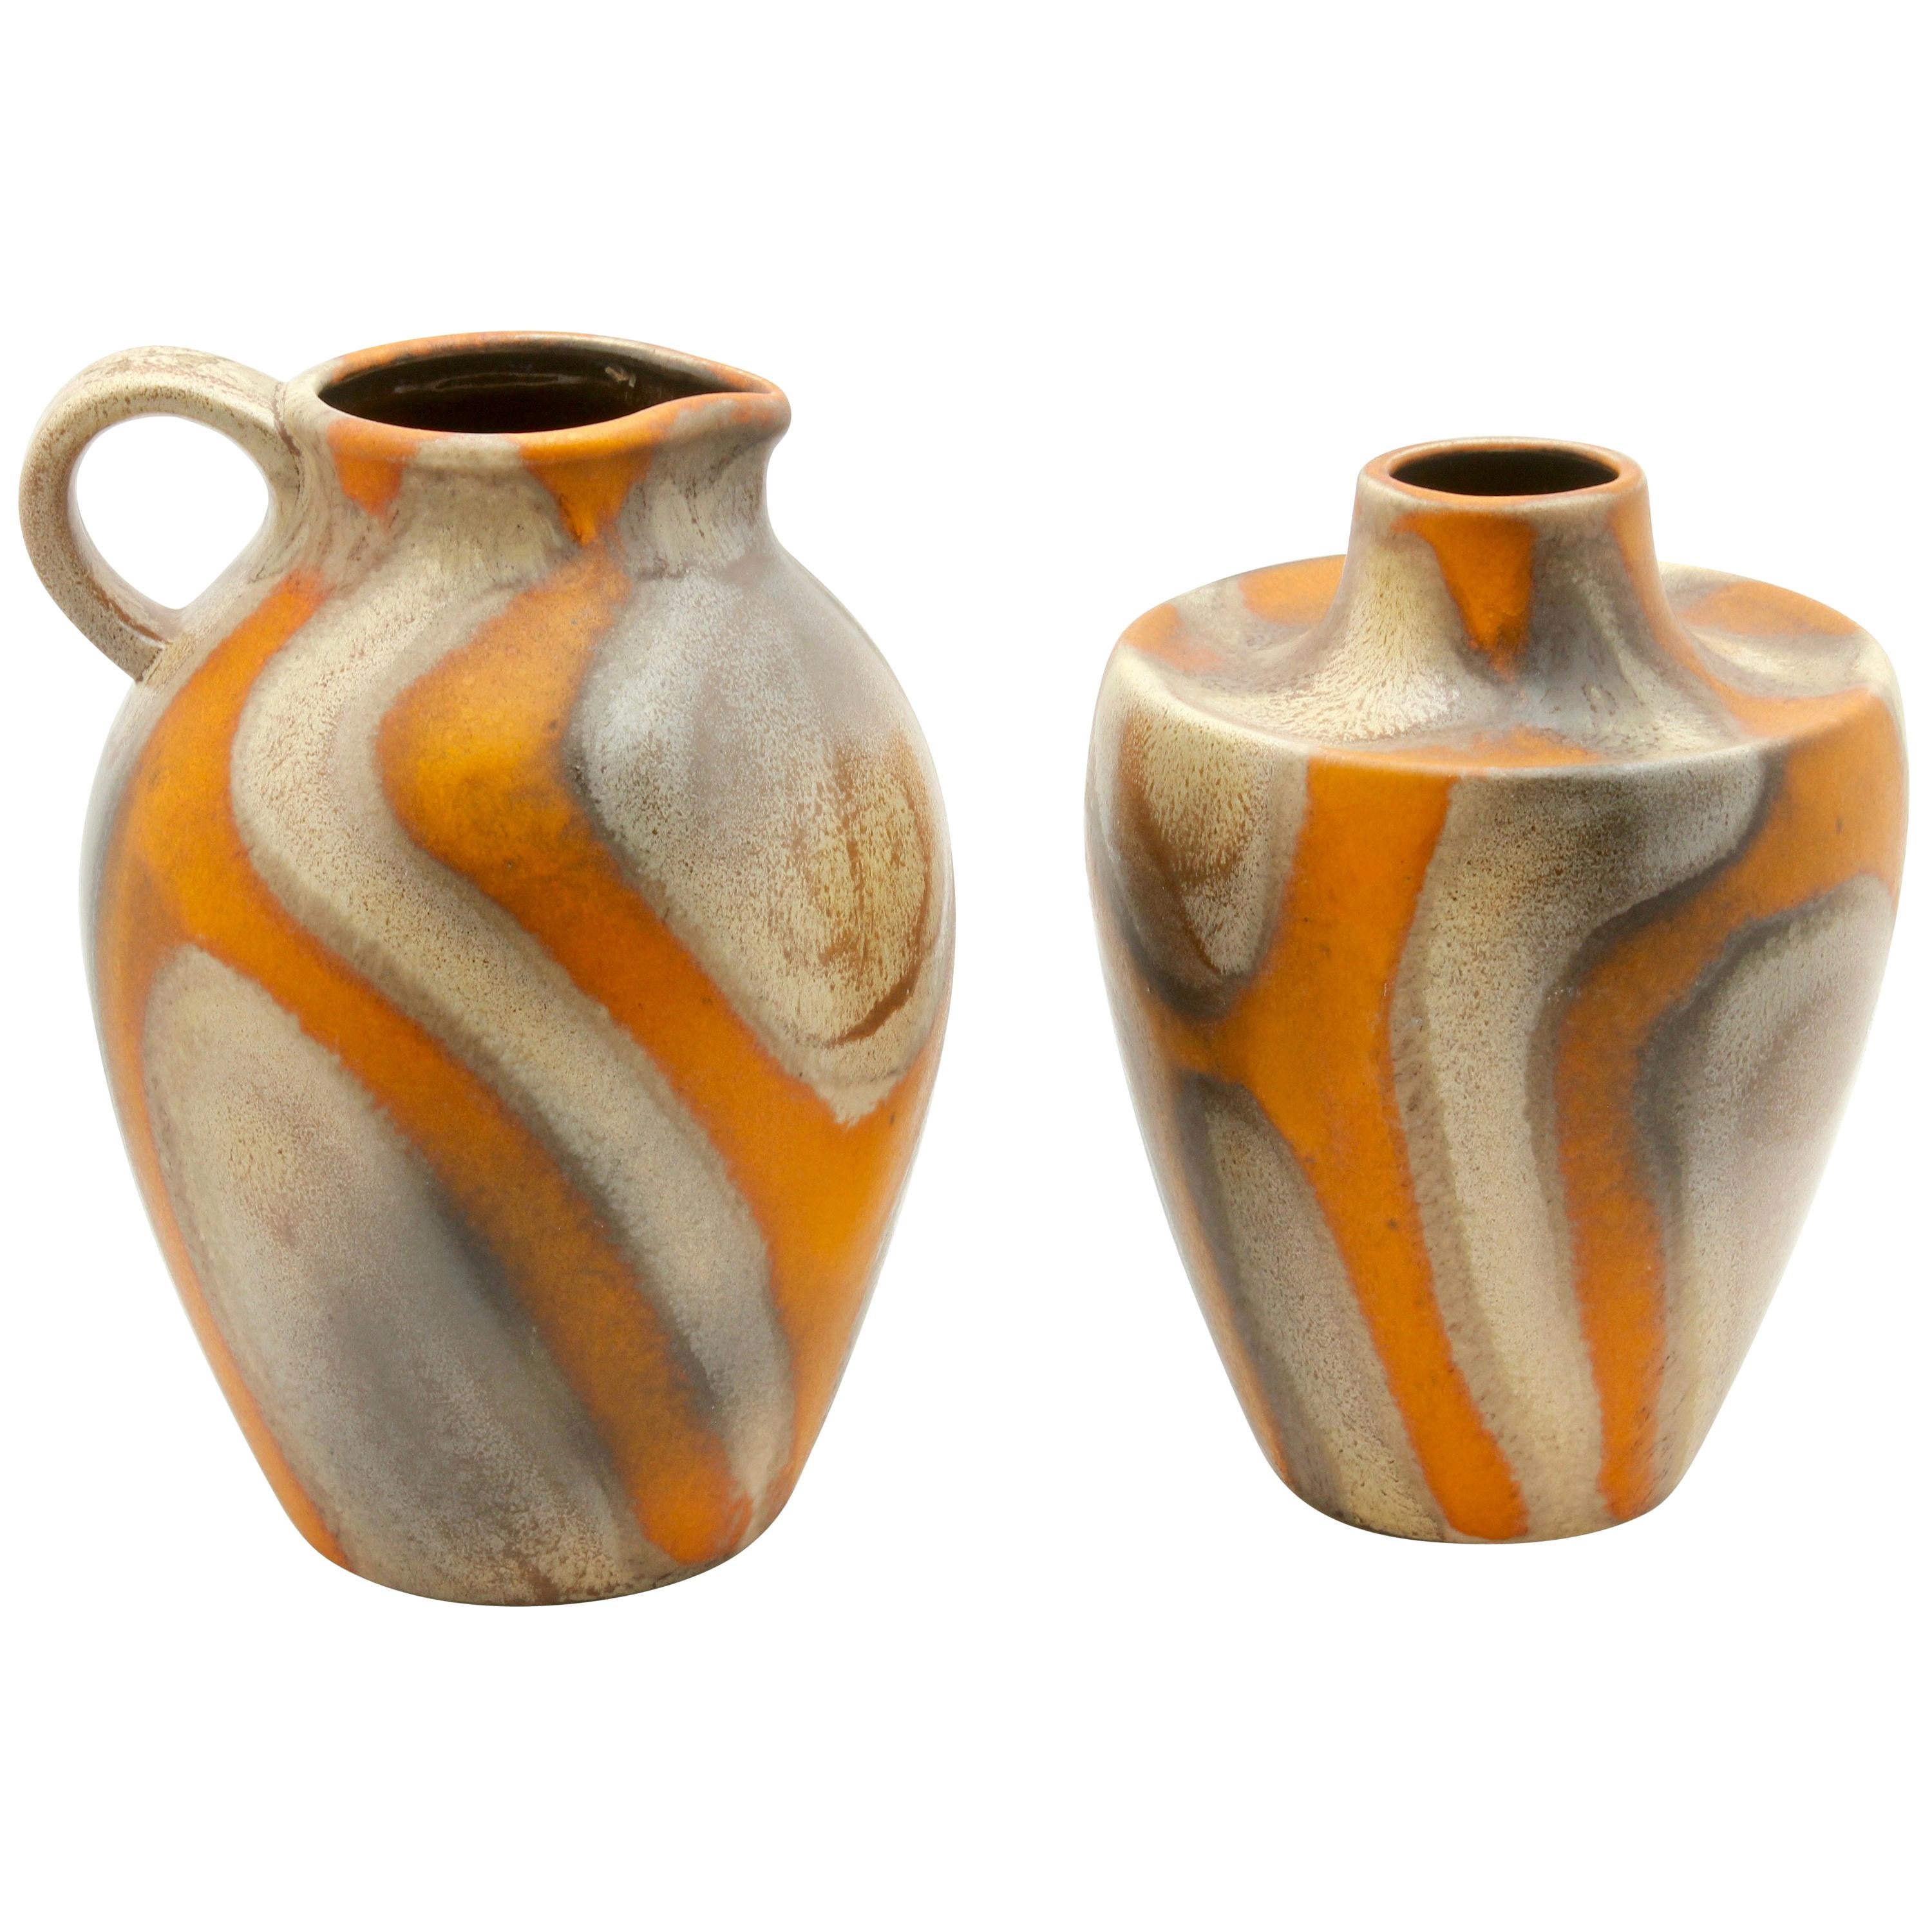 Dumler and Breiden Pieces of Pottery, Mark on the Bottom, Germany, circa 1955